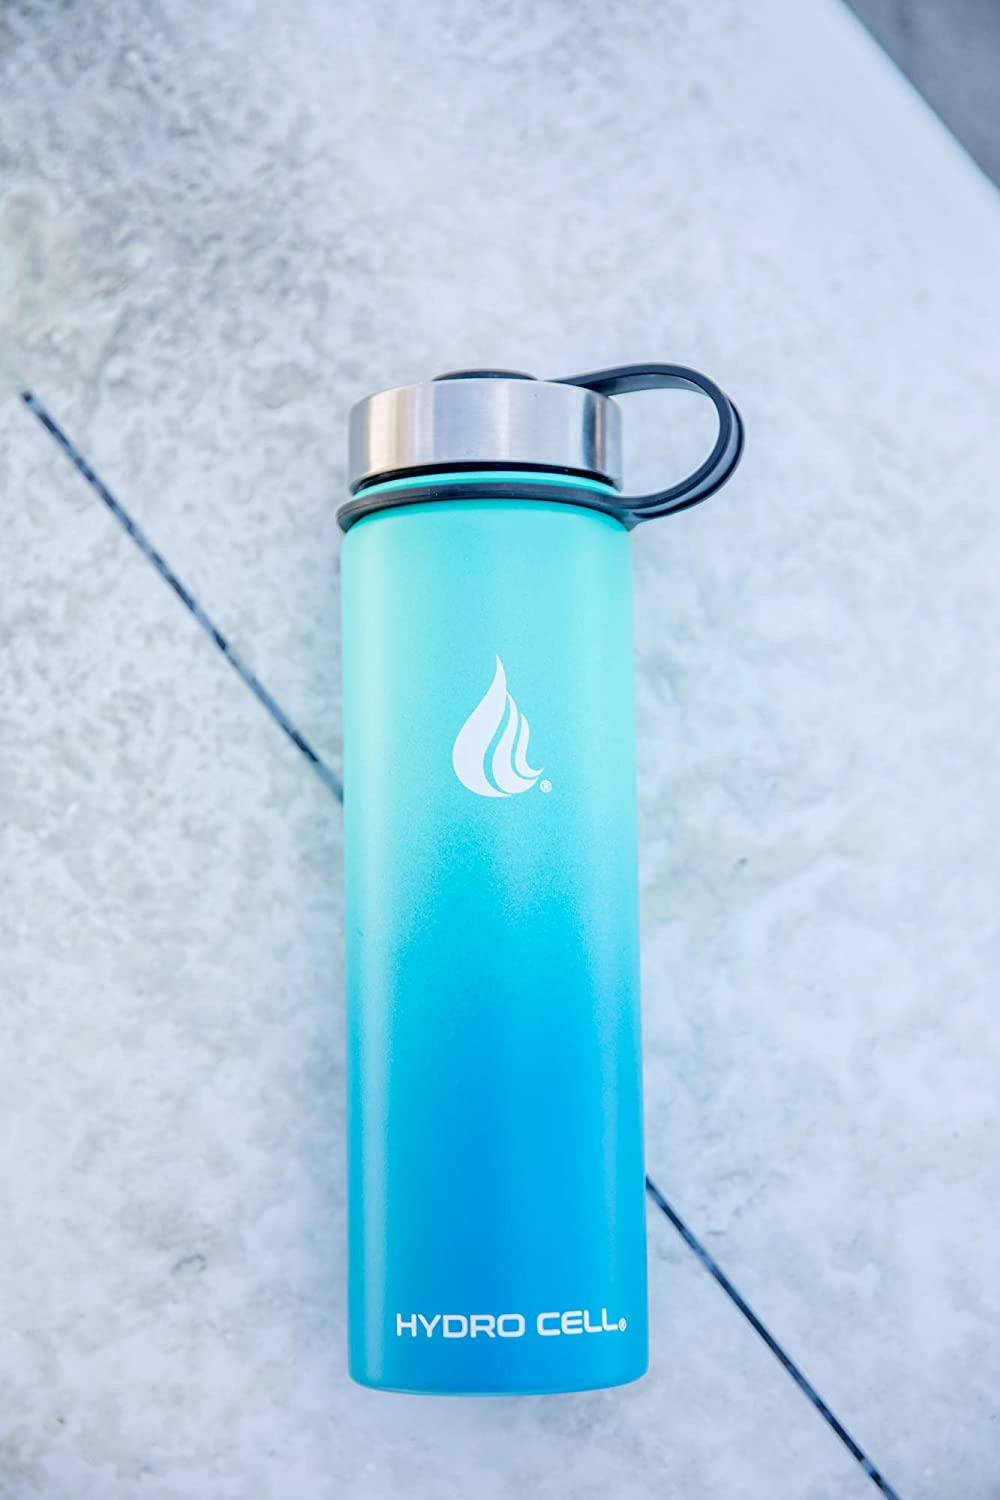 HYDRO CELL Stainless Steel Water Bottle w/Straw & Wide Mouth Lids - Teal/Blue 24oz